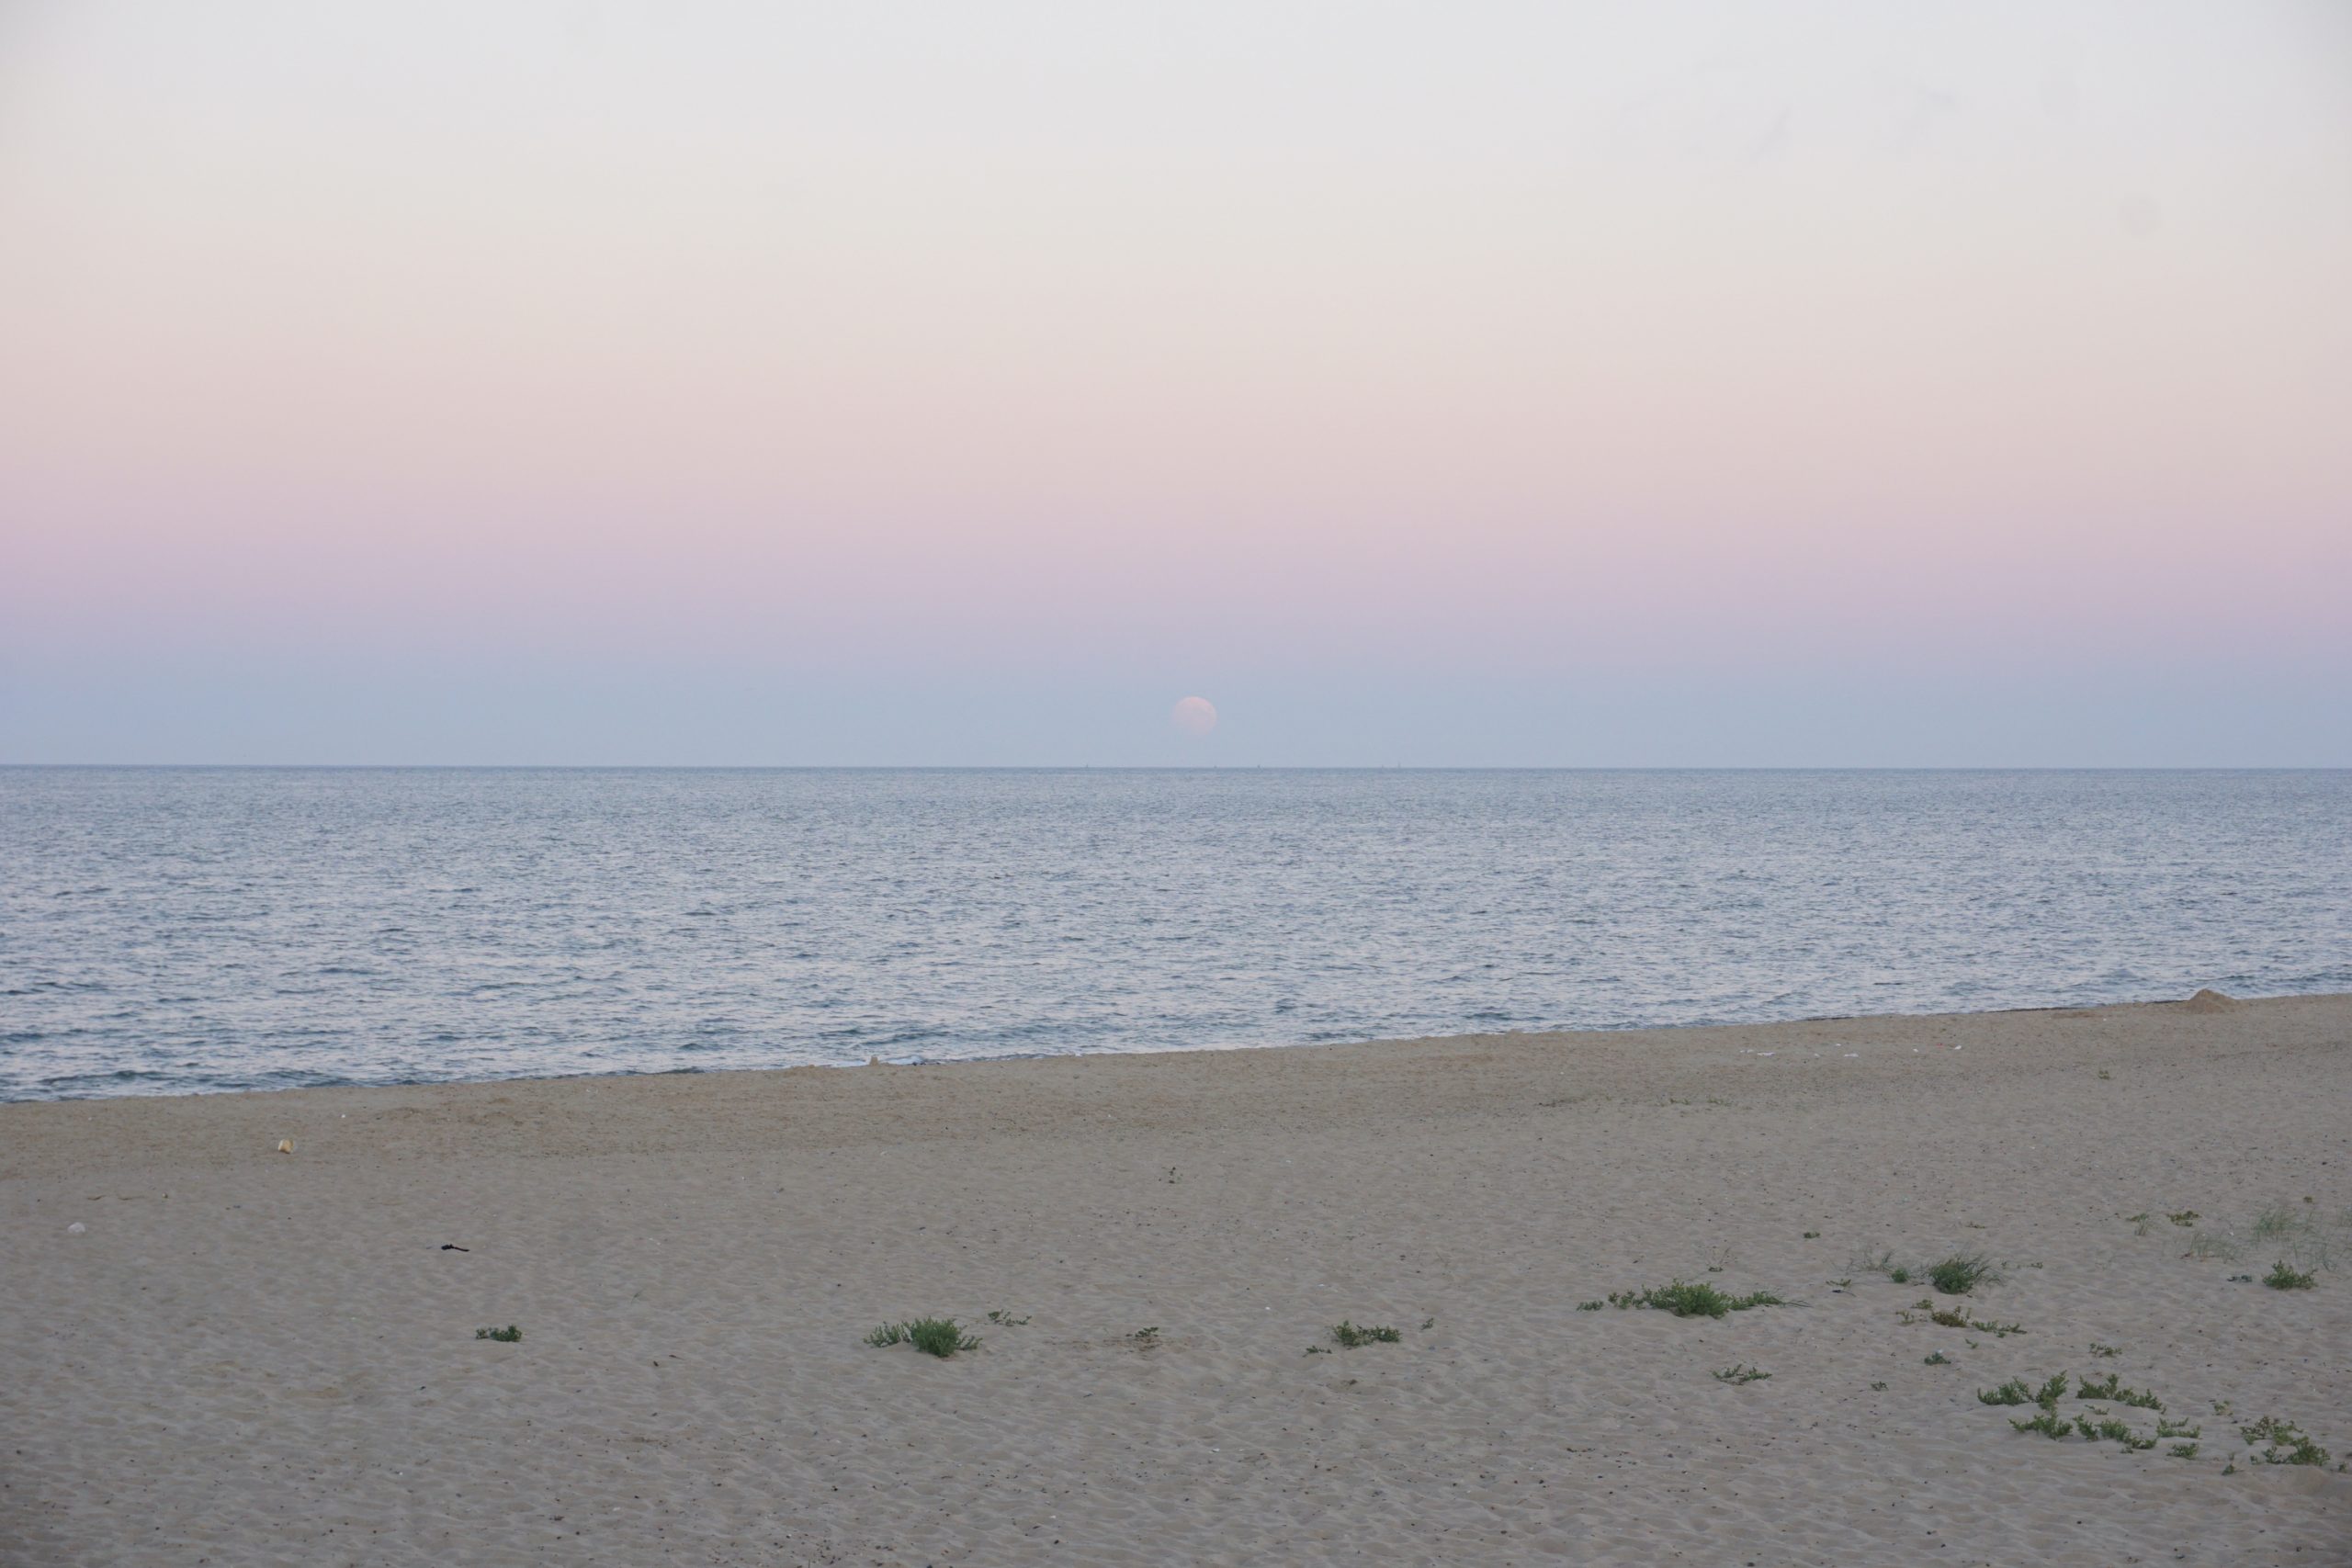 Great Yarmouth Central Beach at dusk with the moon visible in a pink sky above the sea